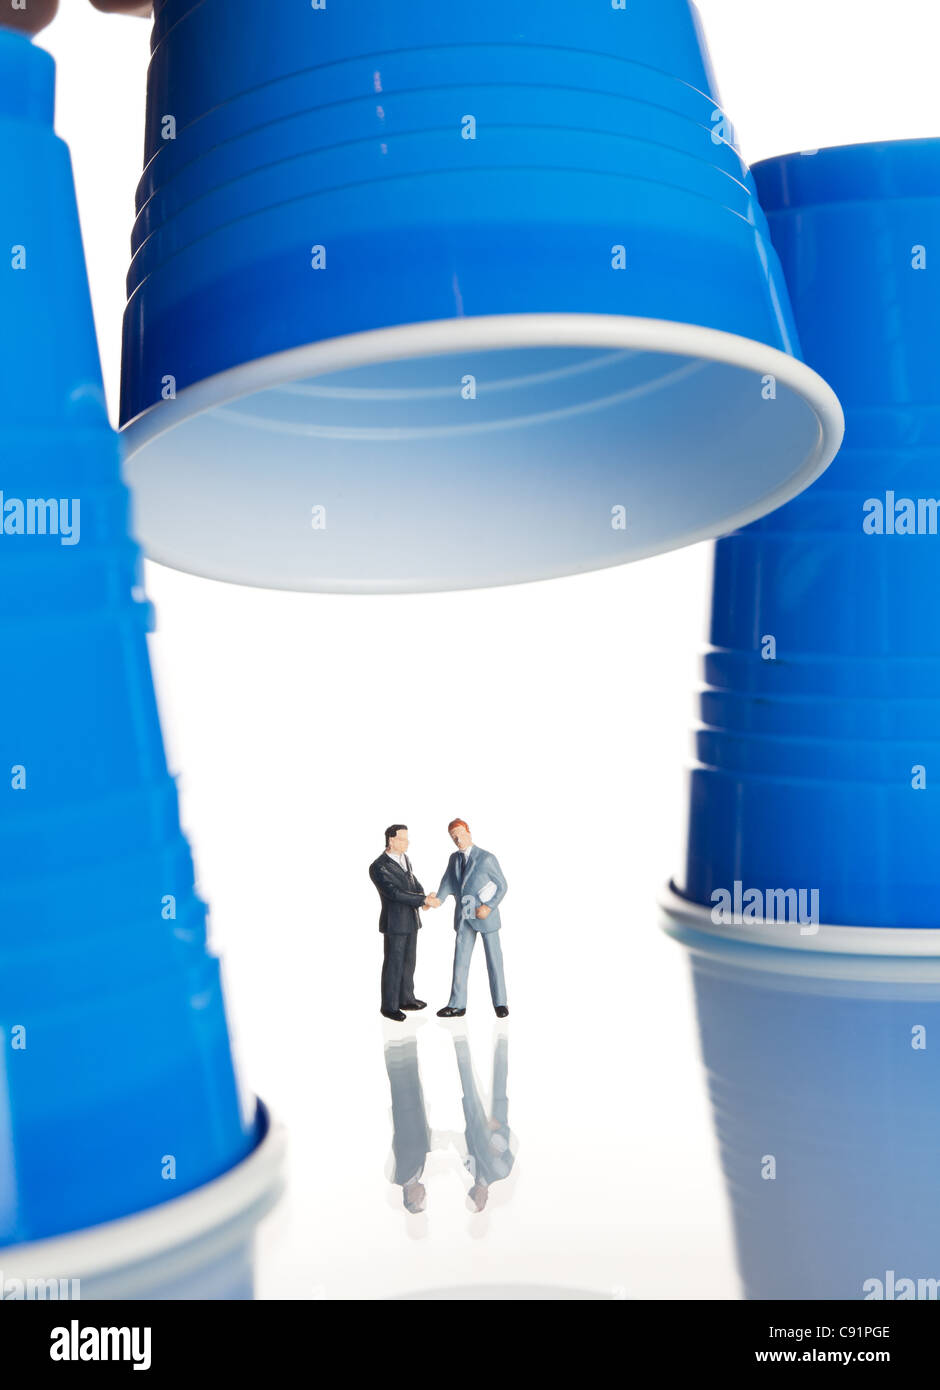 business figurines placed under plastic coffee cups Stock Photo